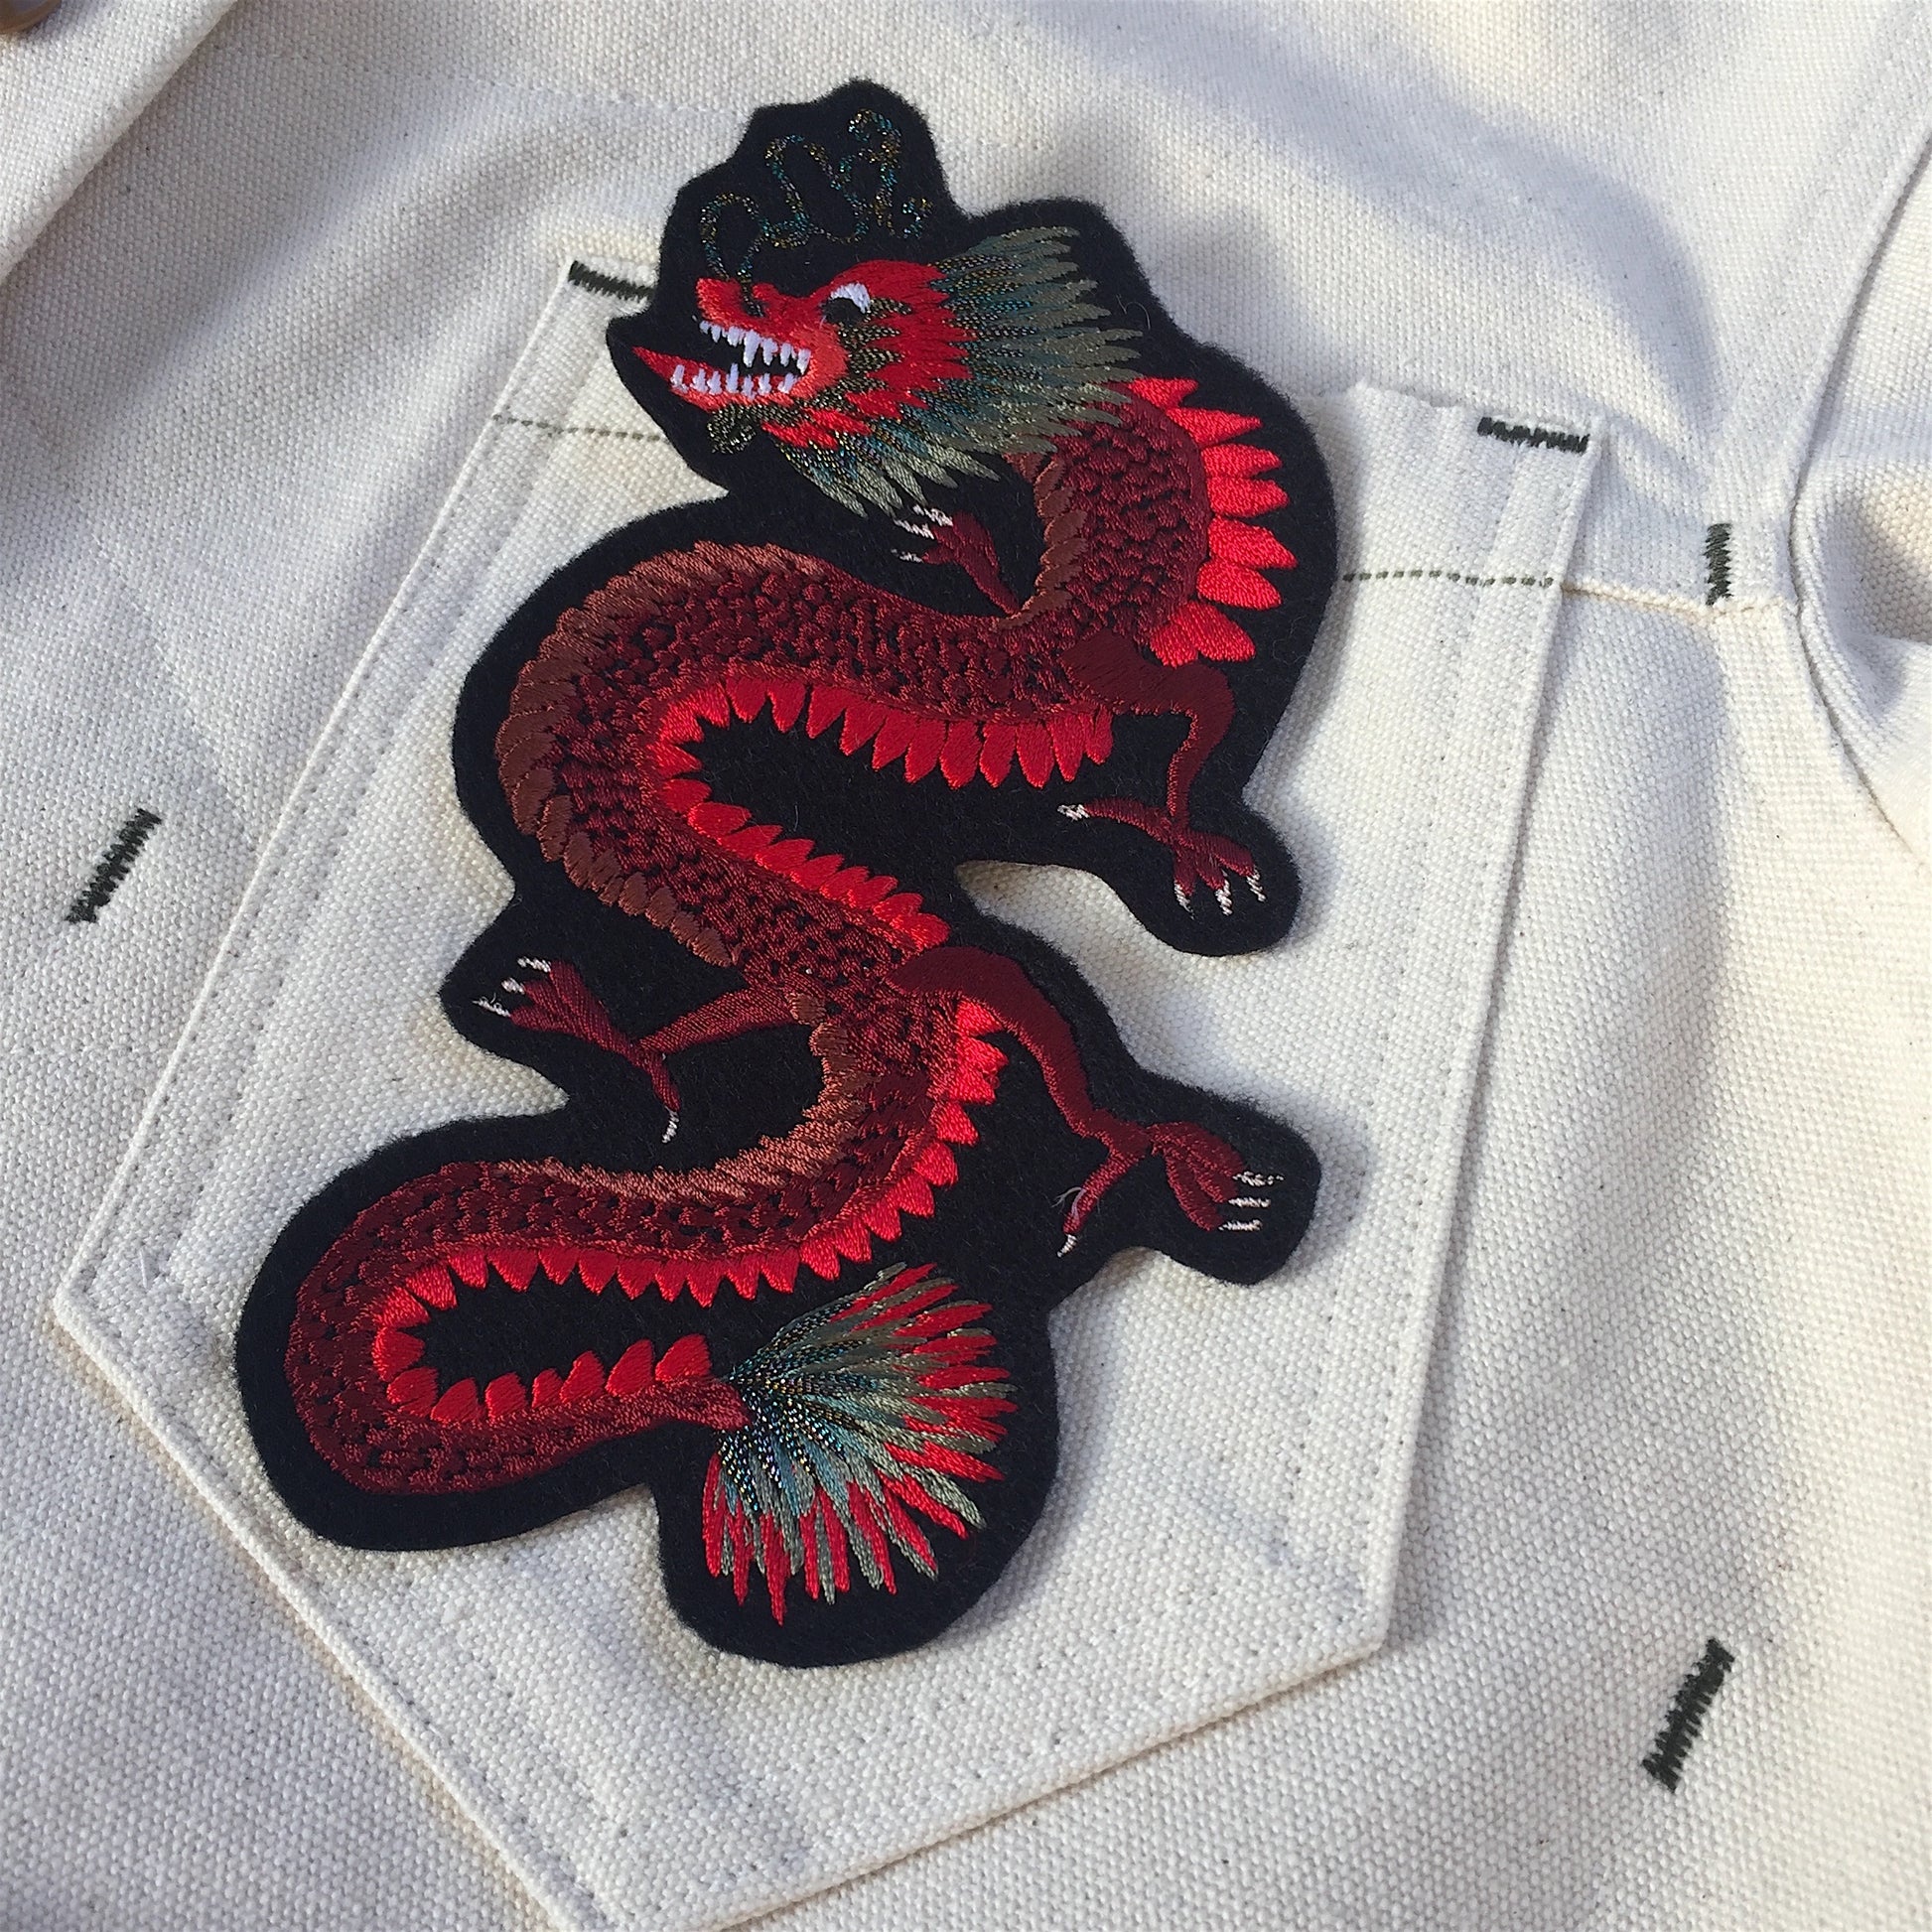 Close-up of dragon embroidered patch shown on pocket of white denim jacket